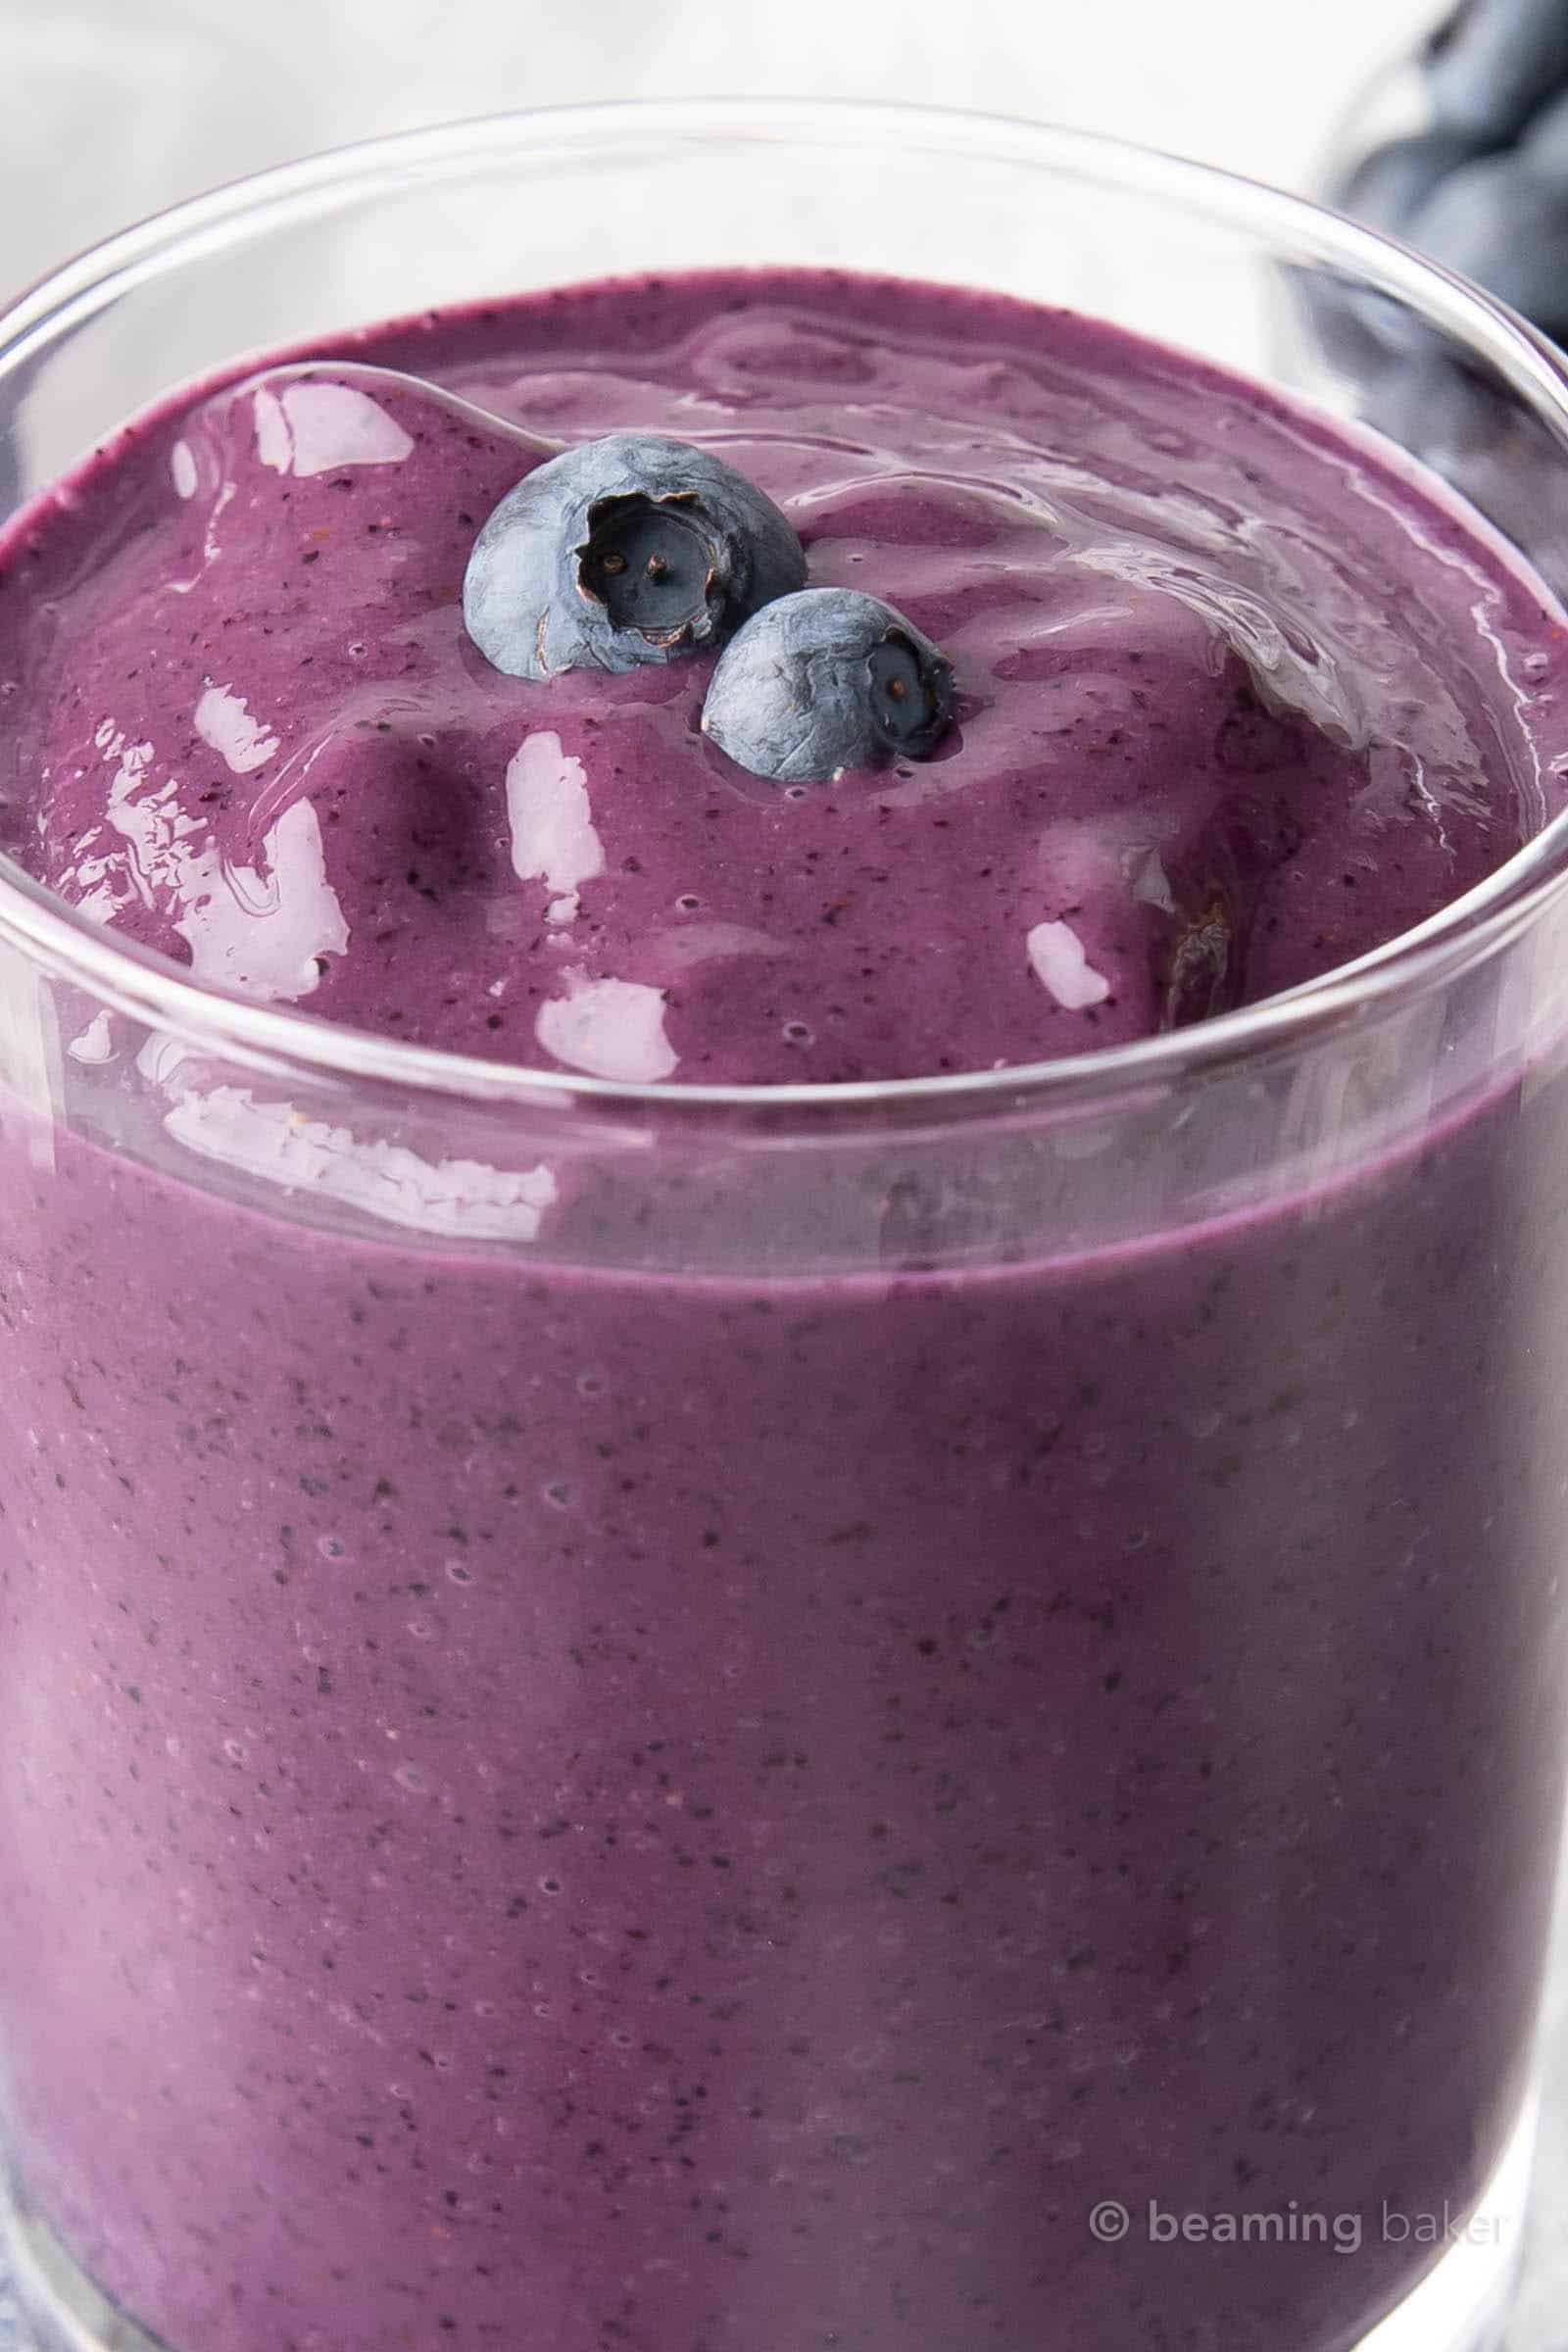 Blueberry Smoothie: just 3 ingredients for the easiest blueberry smoothie recipe ever! The best blueberry smoothie—just minutes to prep for a healthy & refreshing smoothie! #Blueberry #Smoothie #Blueberries #Smoothies | Recipe at BeamingBaker.com